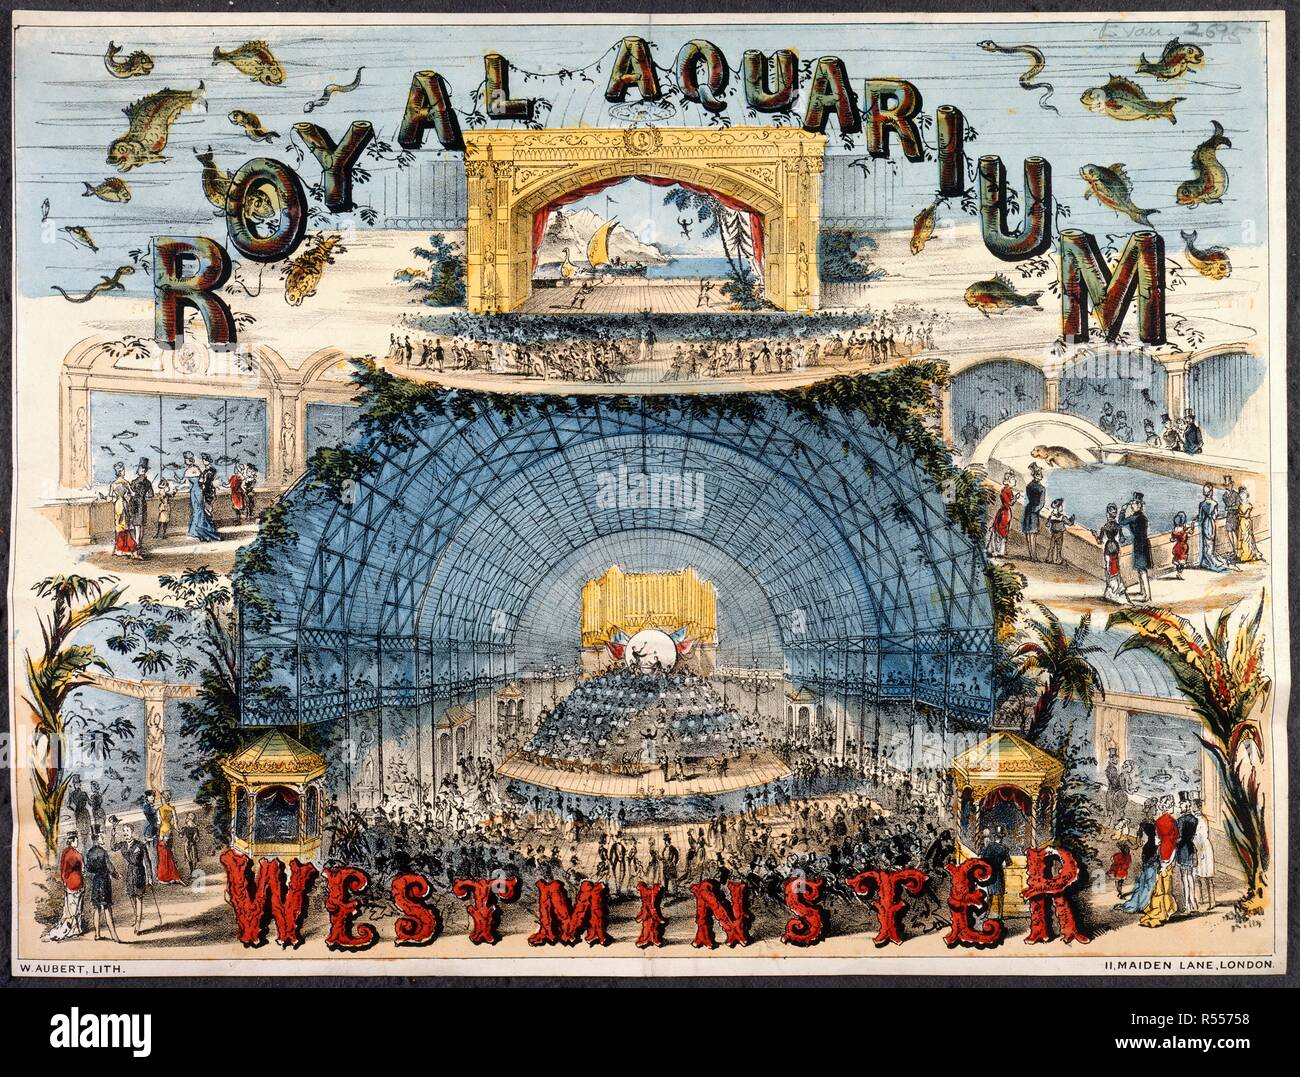 Royal Aquarium, Westminster. With a lithographed illustration. A collection of pamphlets, handbills, and miscellaneous printed matter relating to Victorian entertainment and everyday life. London, 1881. Poster: 34 x 44 cm. Source: EVAN.2695. Author: Evanion, Henry. Stock Photo